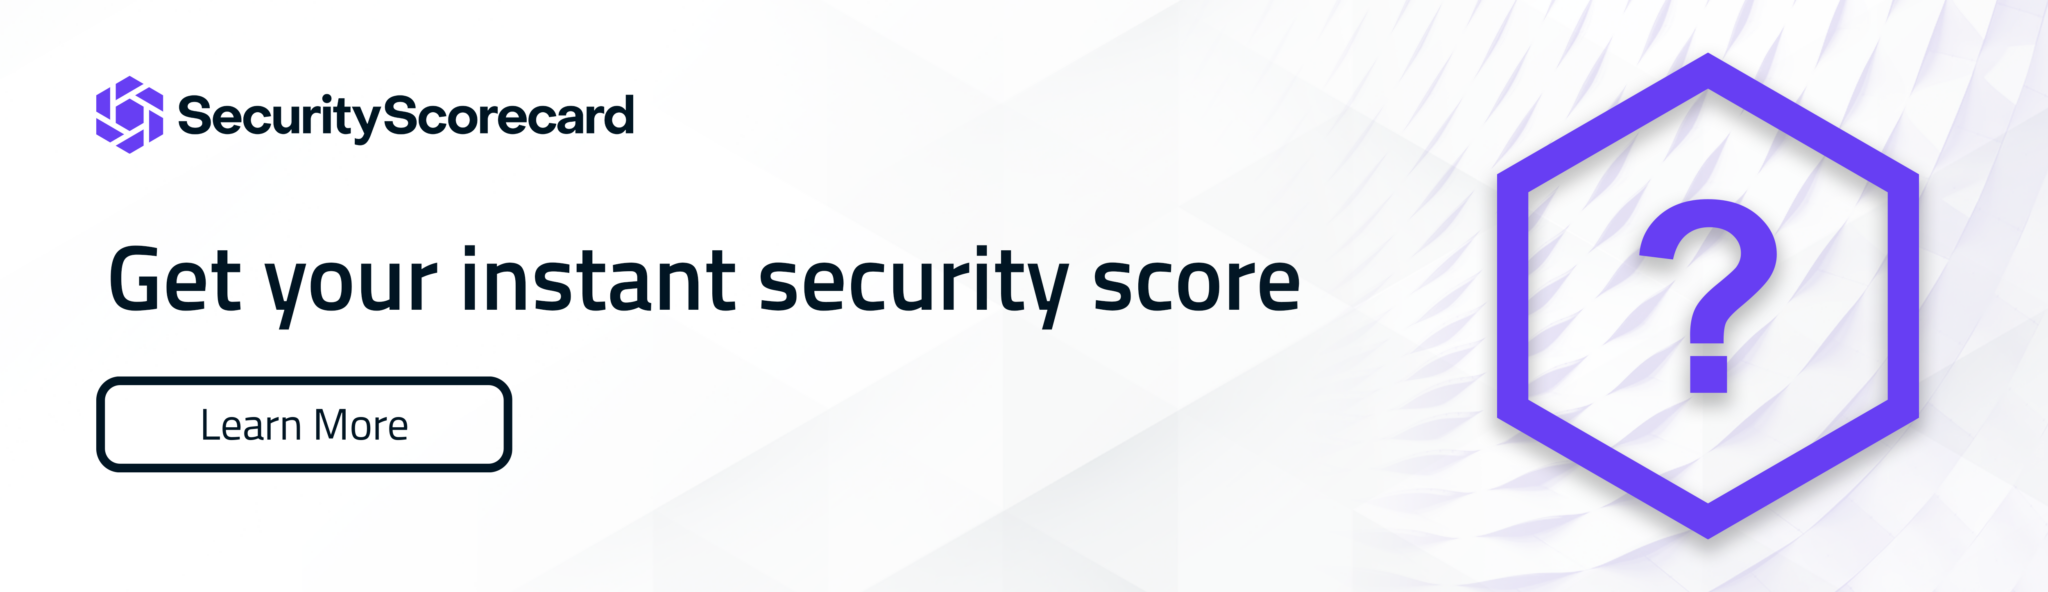 Get your instant security score